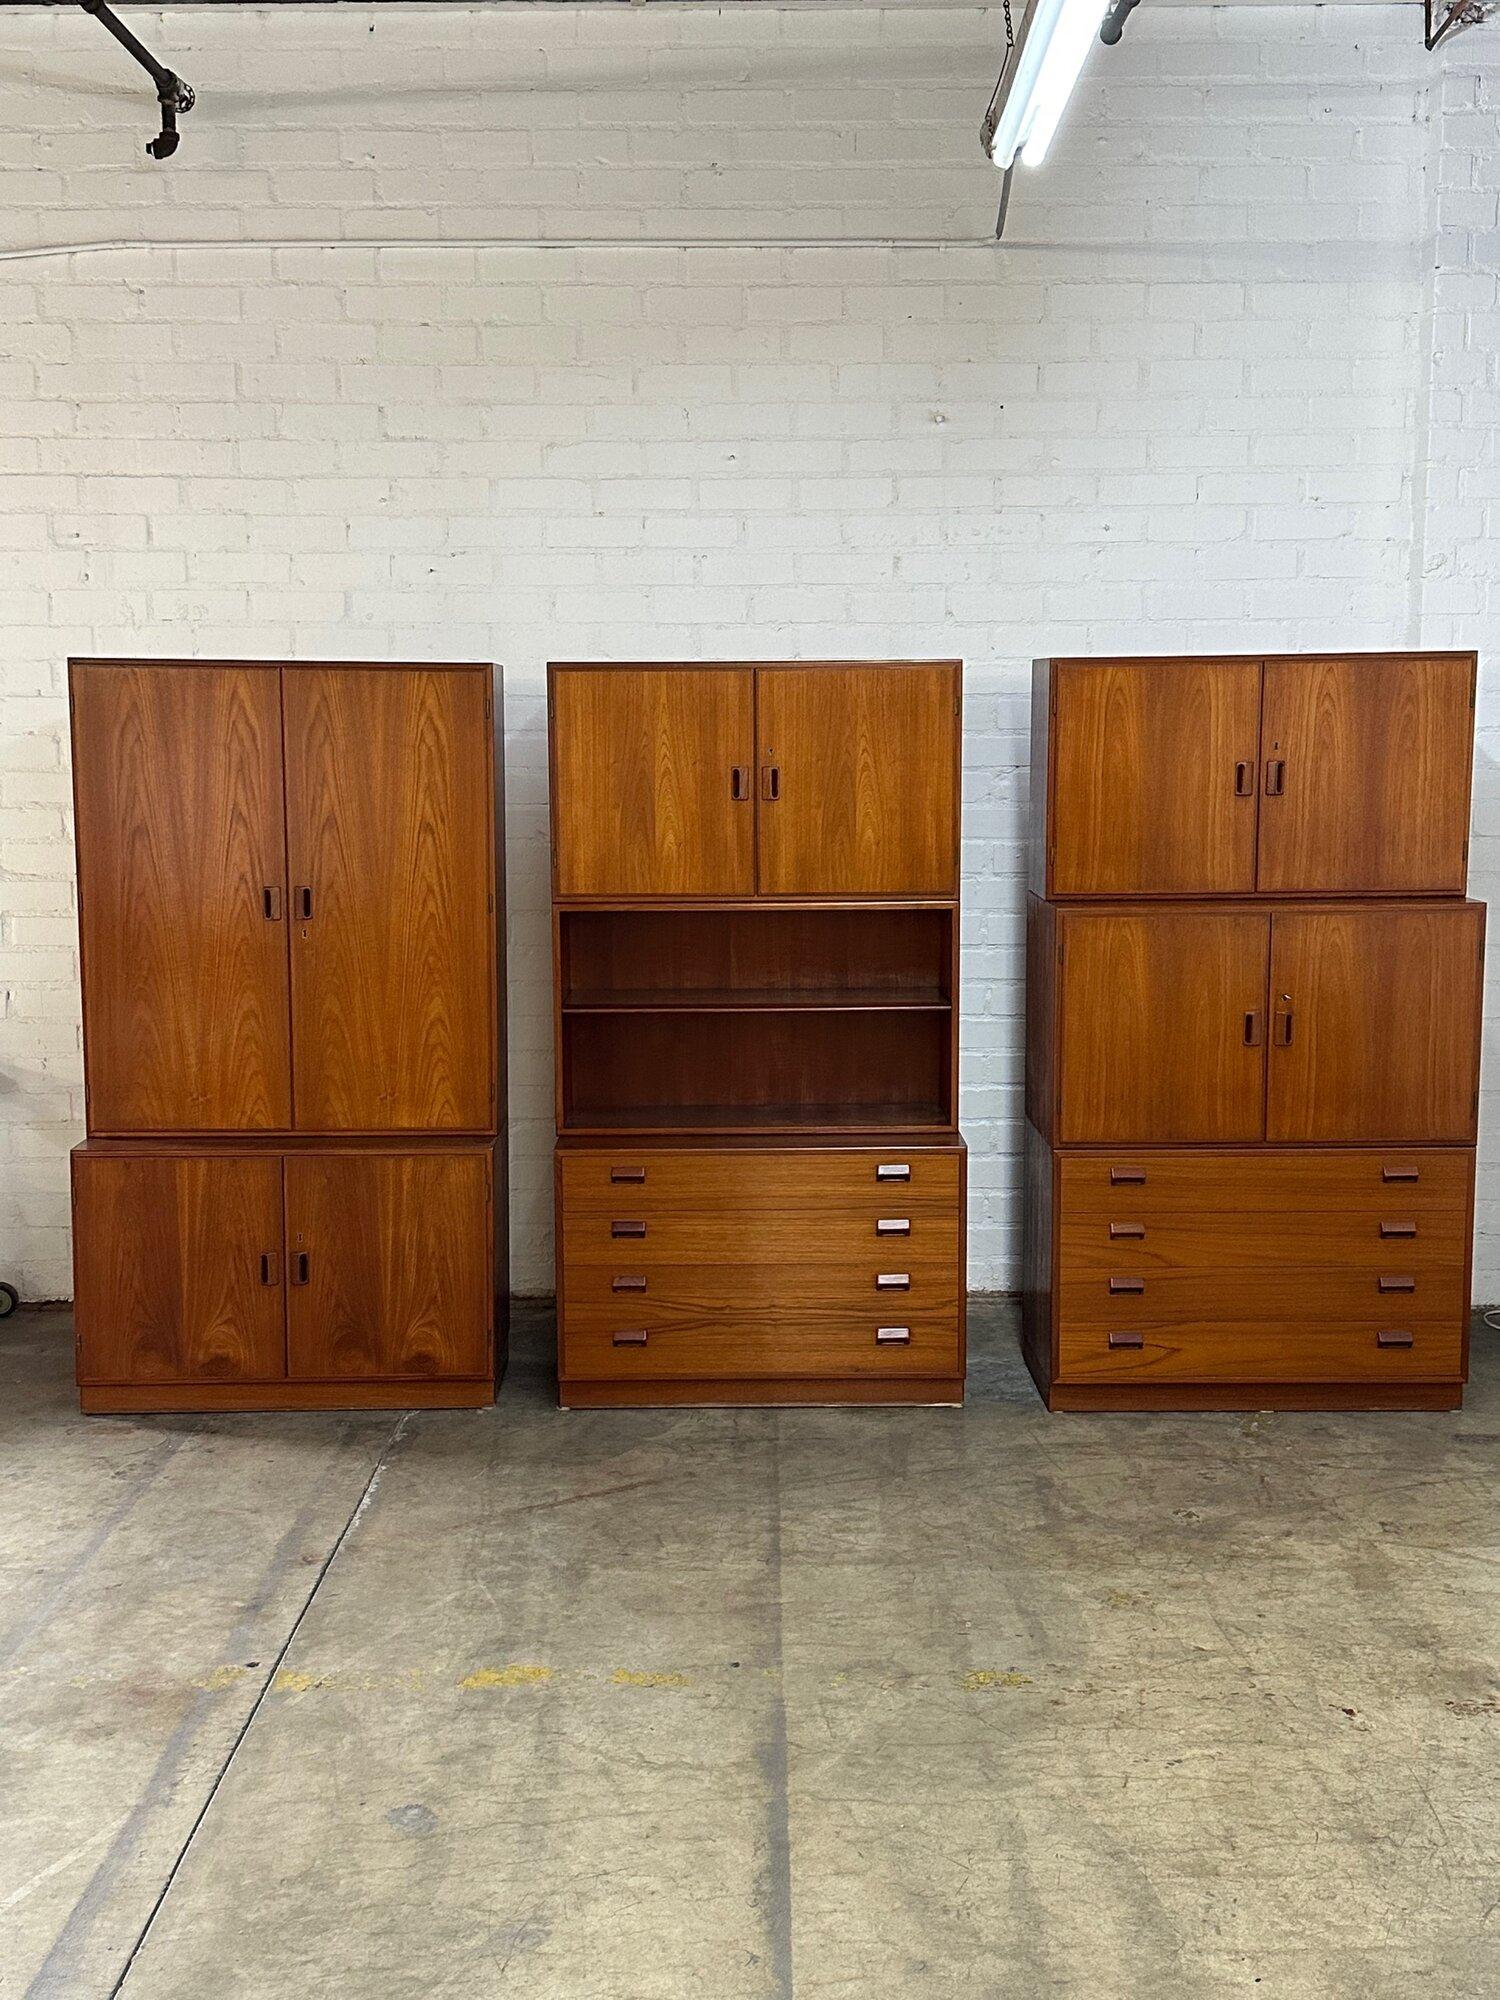 W40 D18.5 H72

ALL units are either 18.5 in depth or 12.5.

Each section can being sold in either units of two or three as pictured. All Three units are available as seen in photos. If you like to buy individual you must select AT LEAST ONE Base